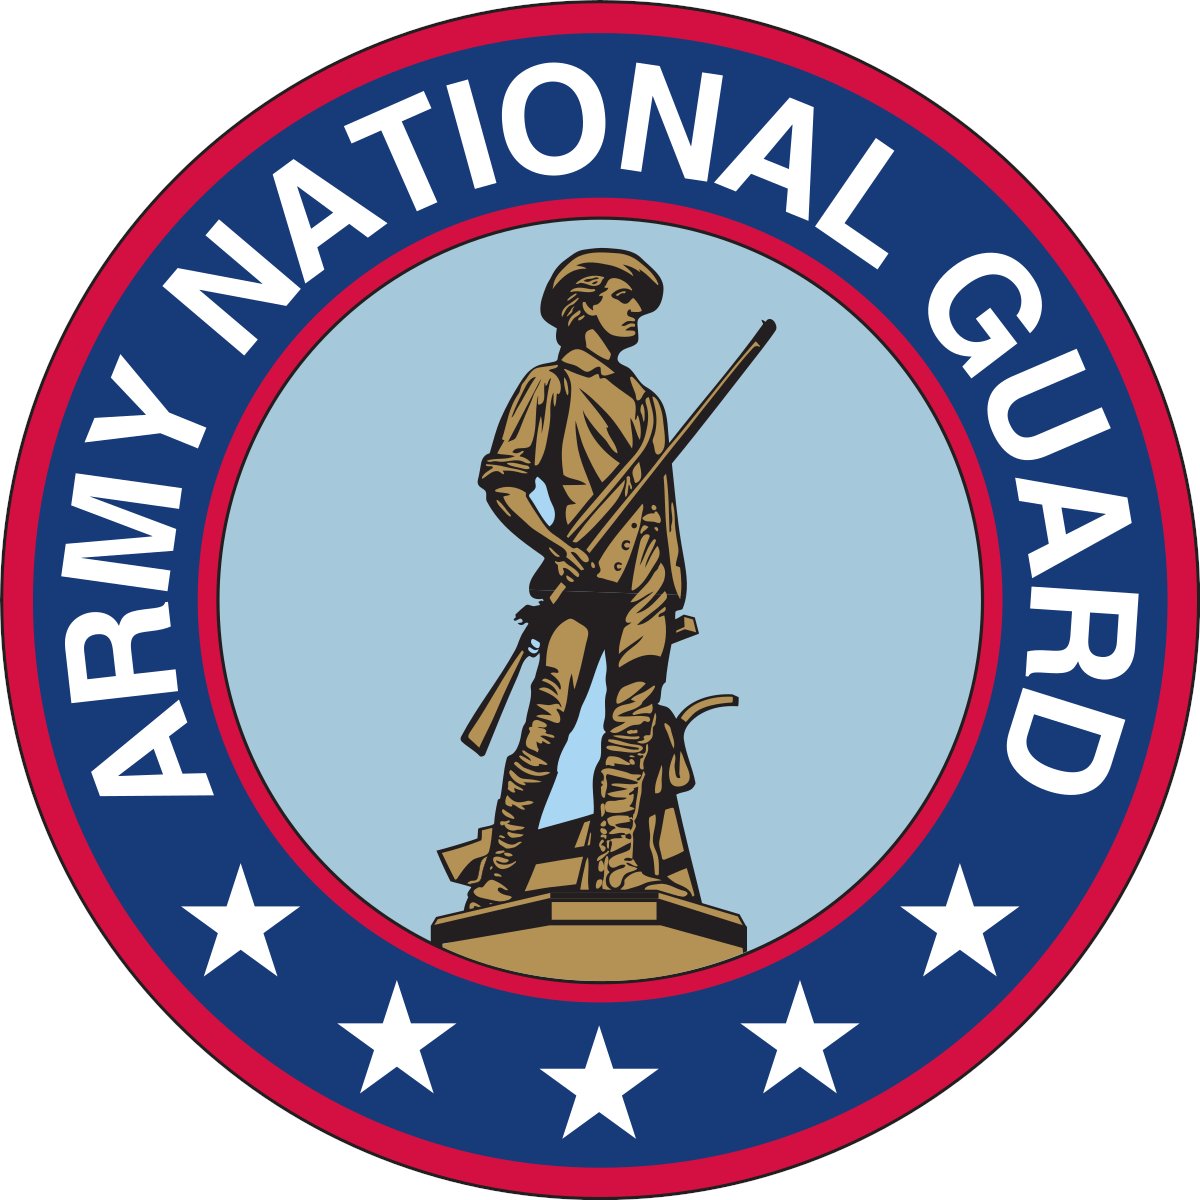 There were 18 undermanned divisions in the  @USNationalGuard which could easily absorb thousands of draftees who would otherwise swamp the Regular  @USArmy, most likely the Infantry divisions, or possibly undermine the ongoing modernization processes.